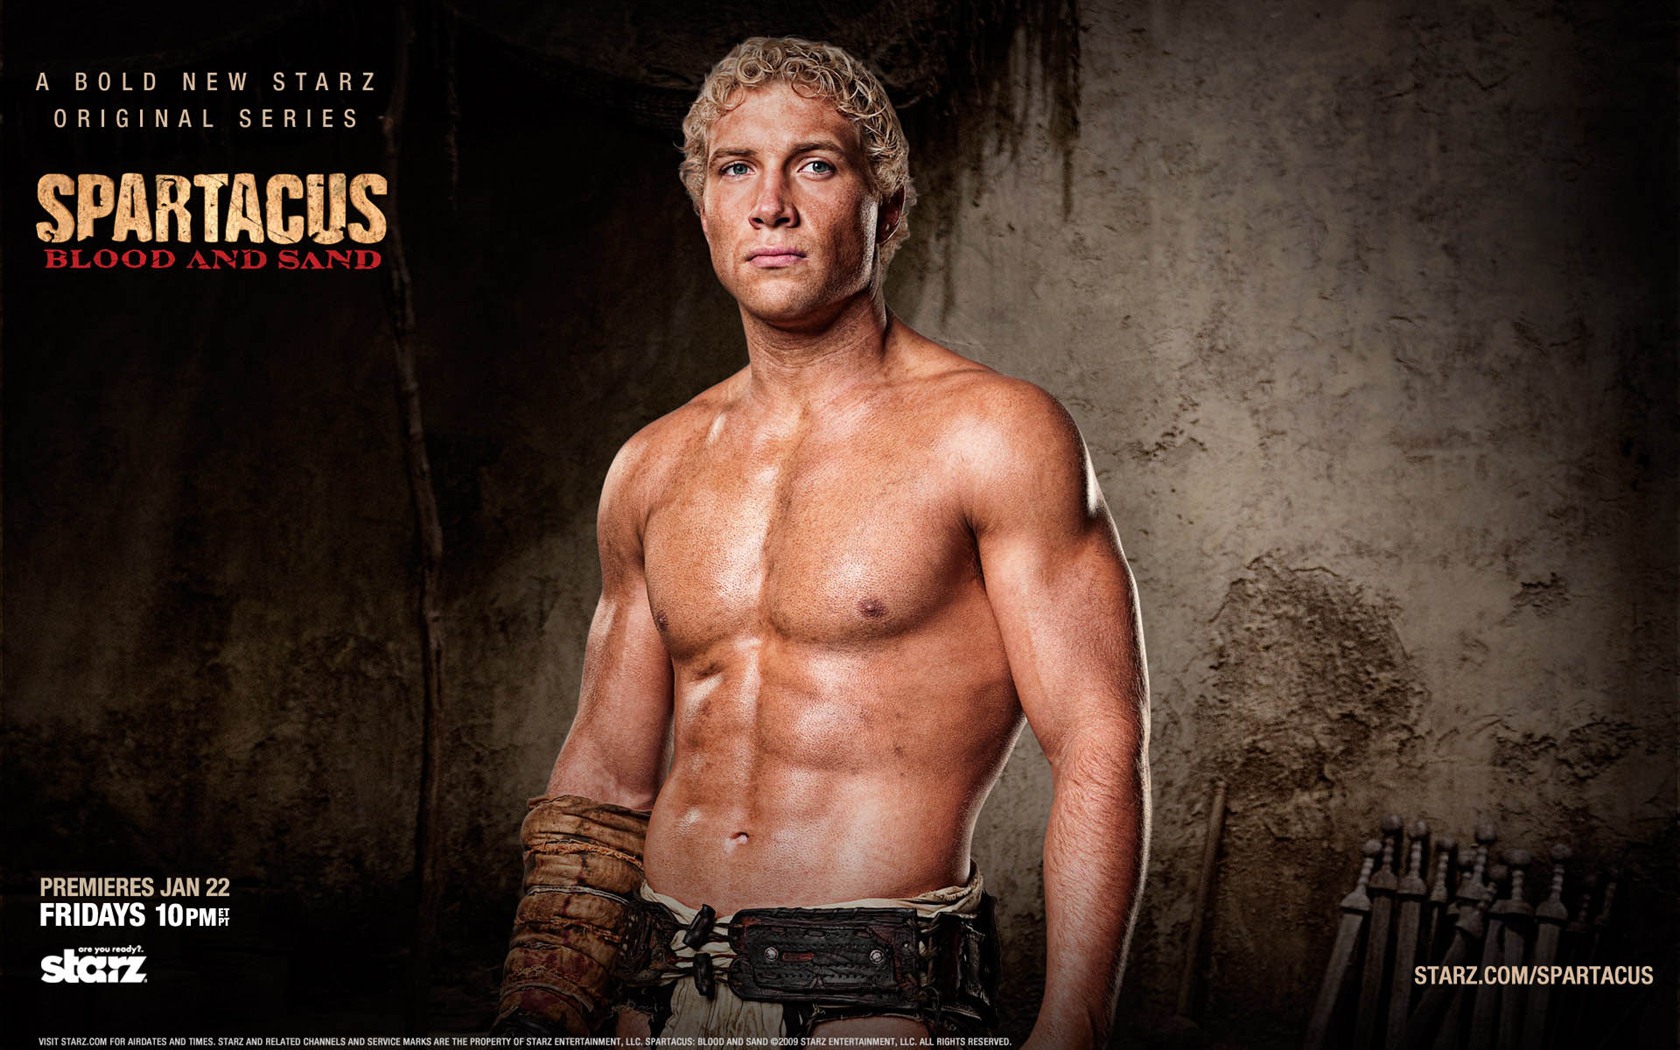 Spartacus: Blood and Sand HD Wallpaper #2 - 1680x1050